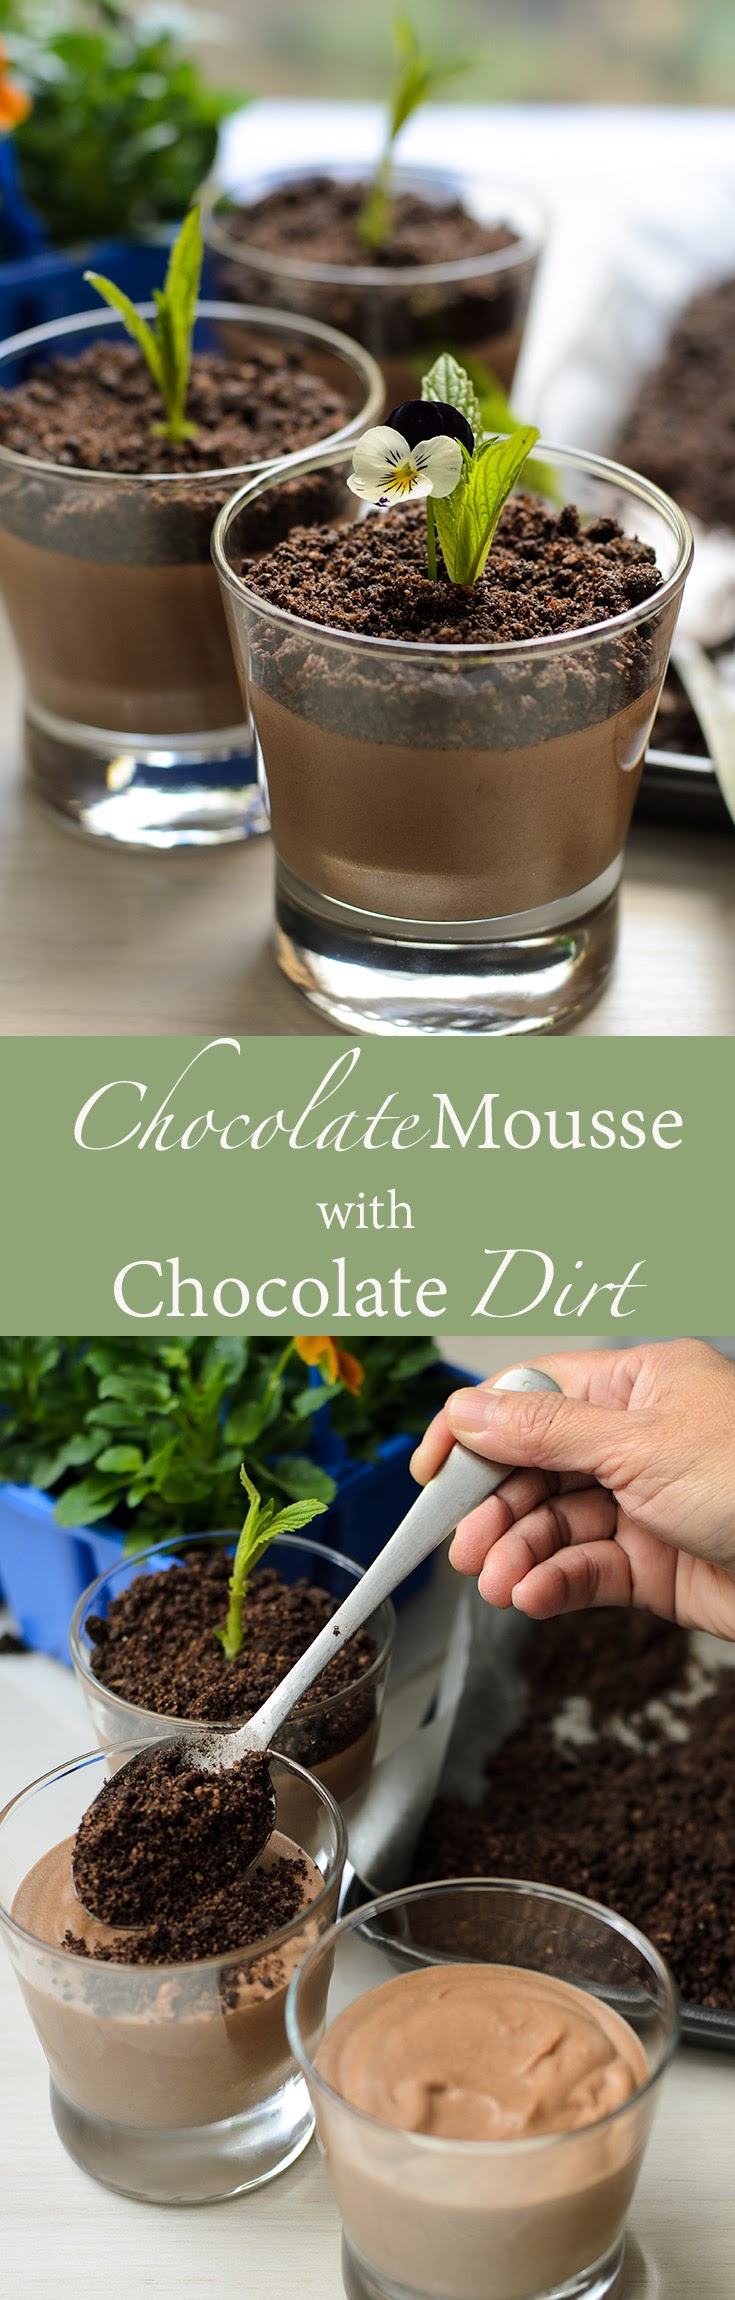 Chocolate Mousse with chocolate dirt